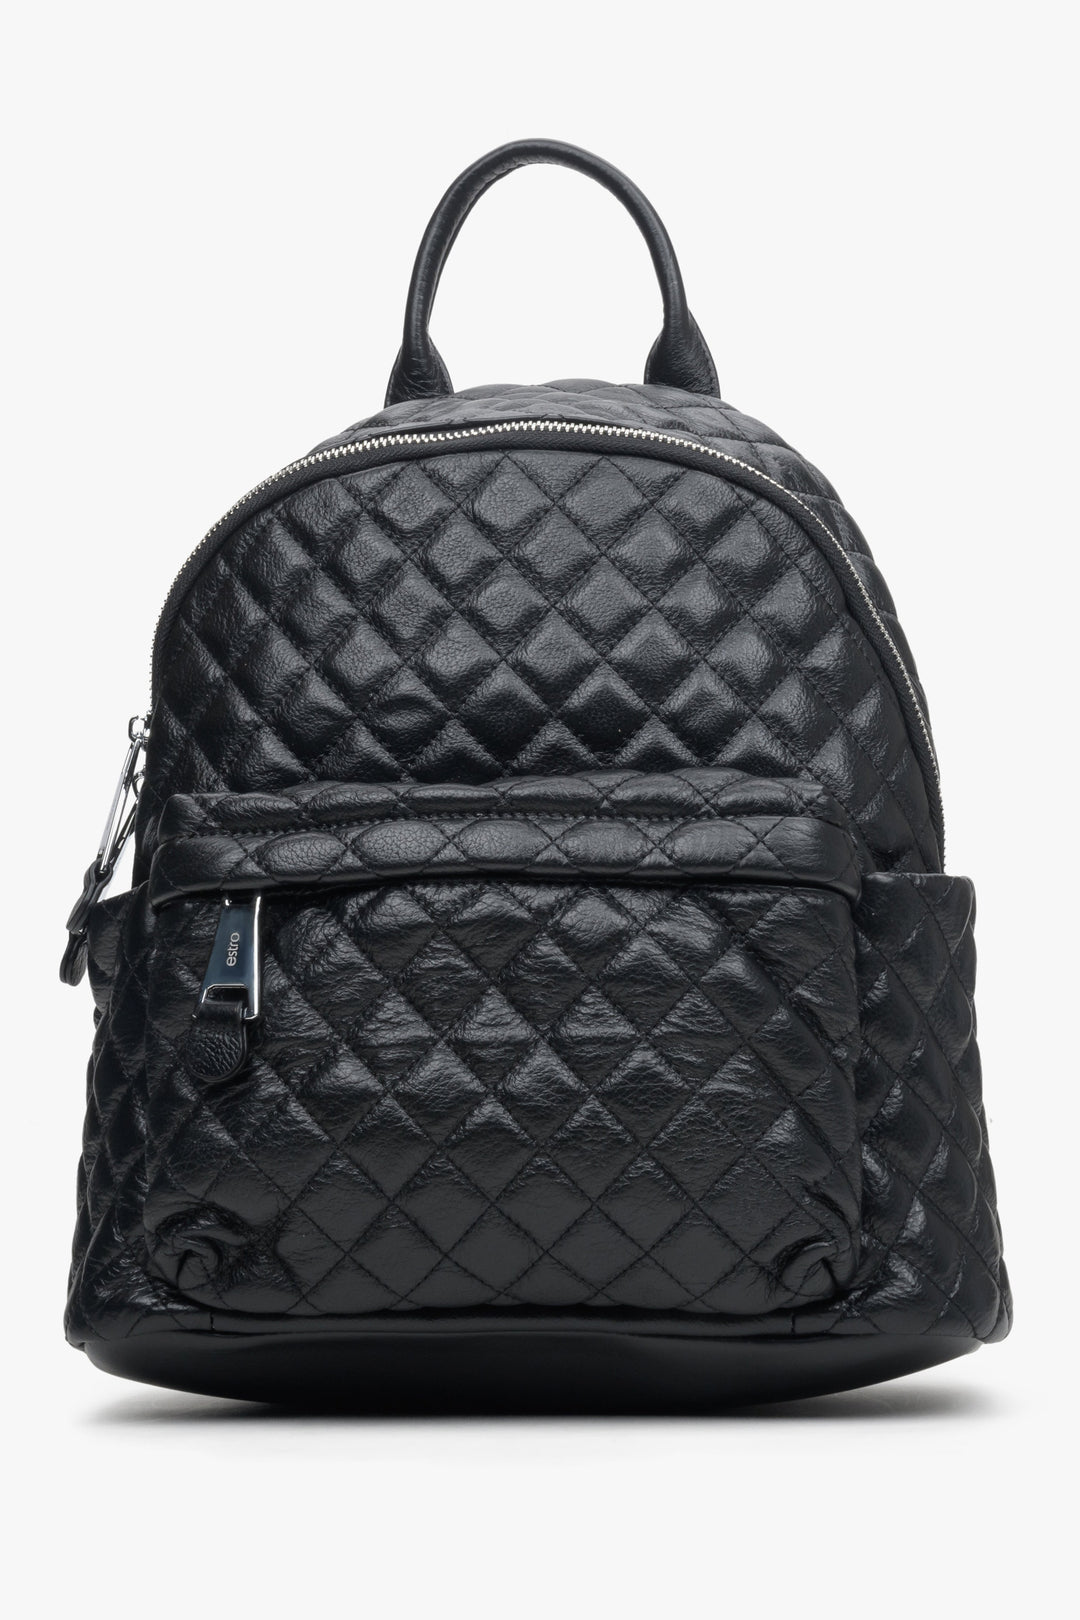 Women's Black Backpack made of Quilted Genuine Leather Estro ER00111251.